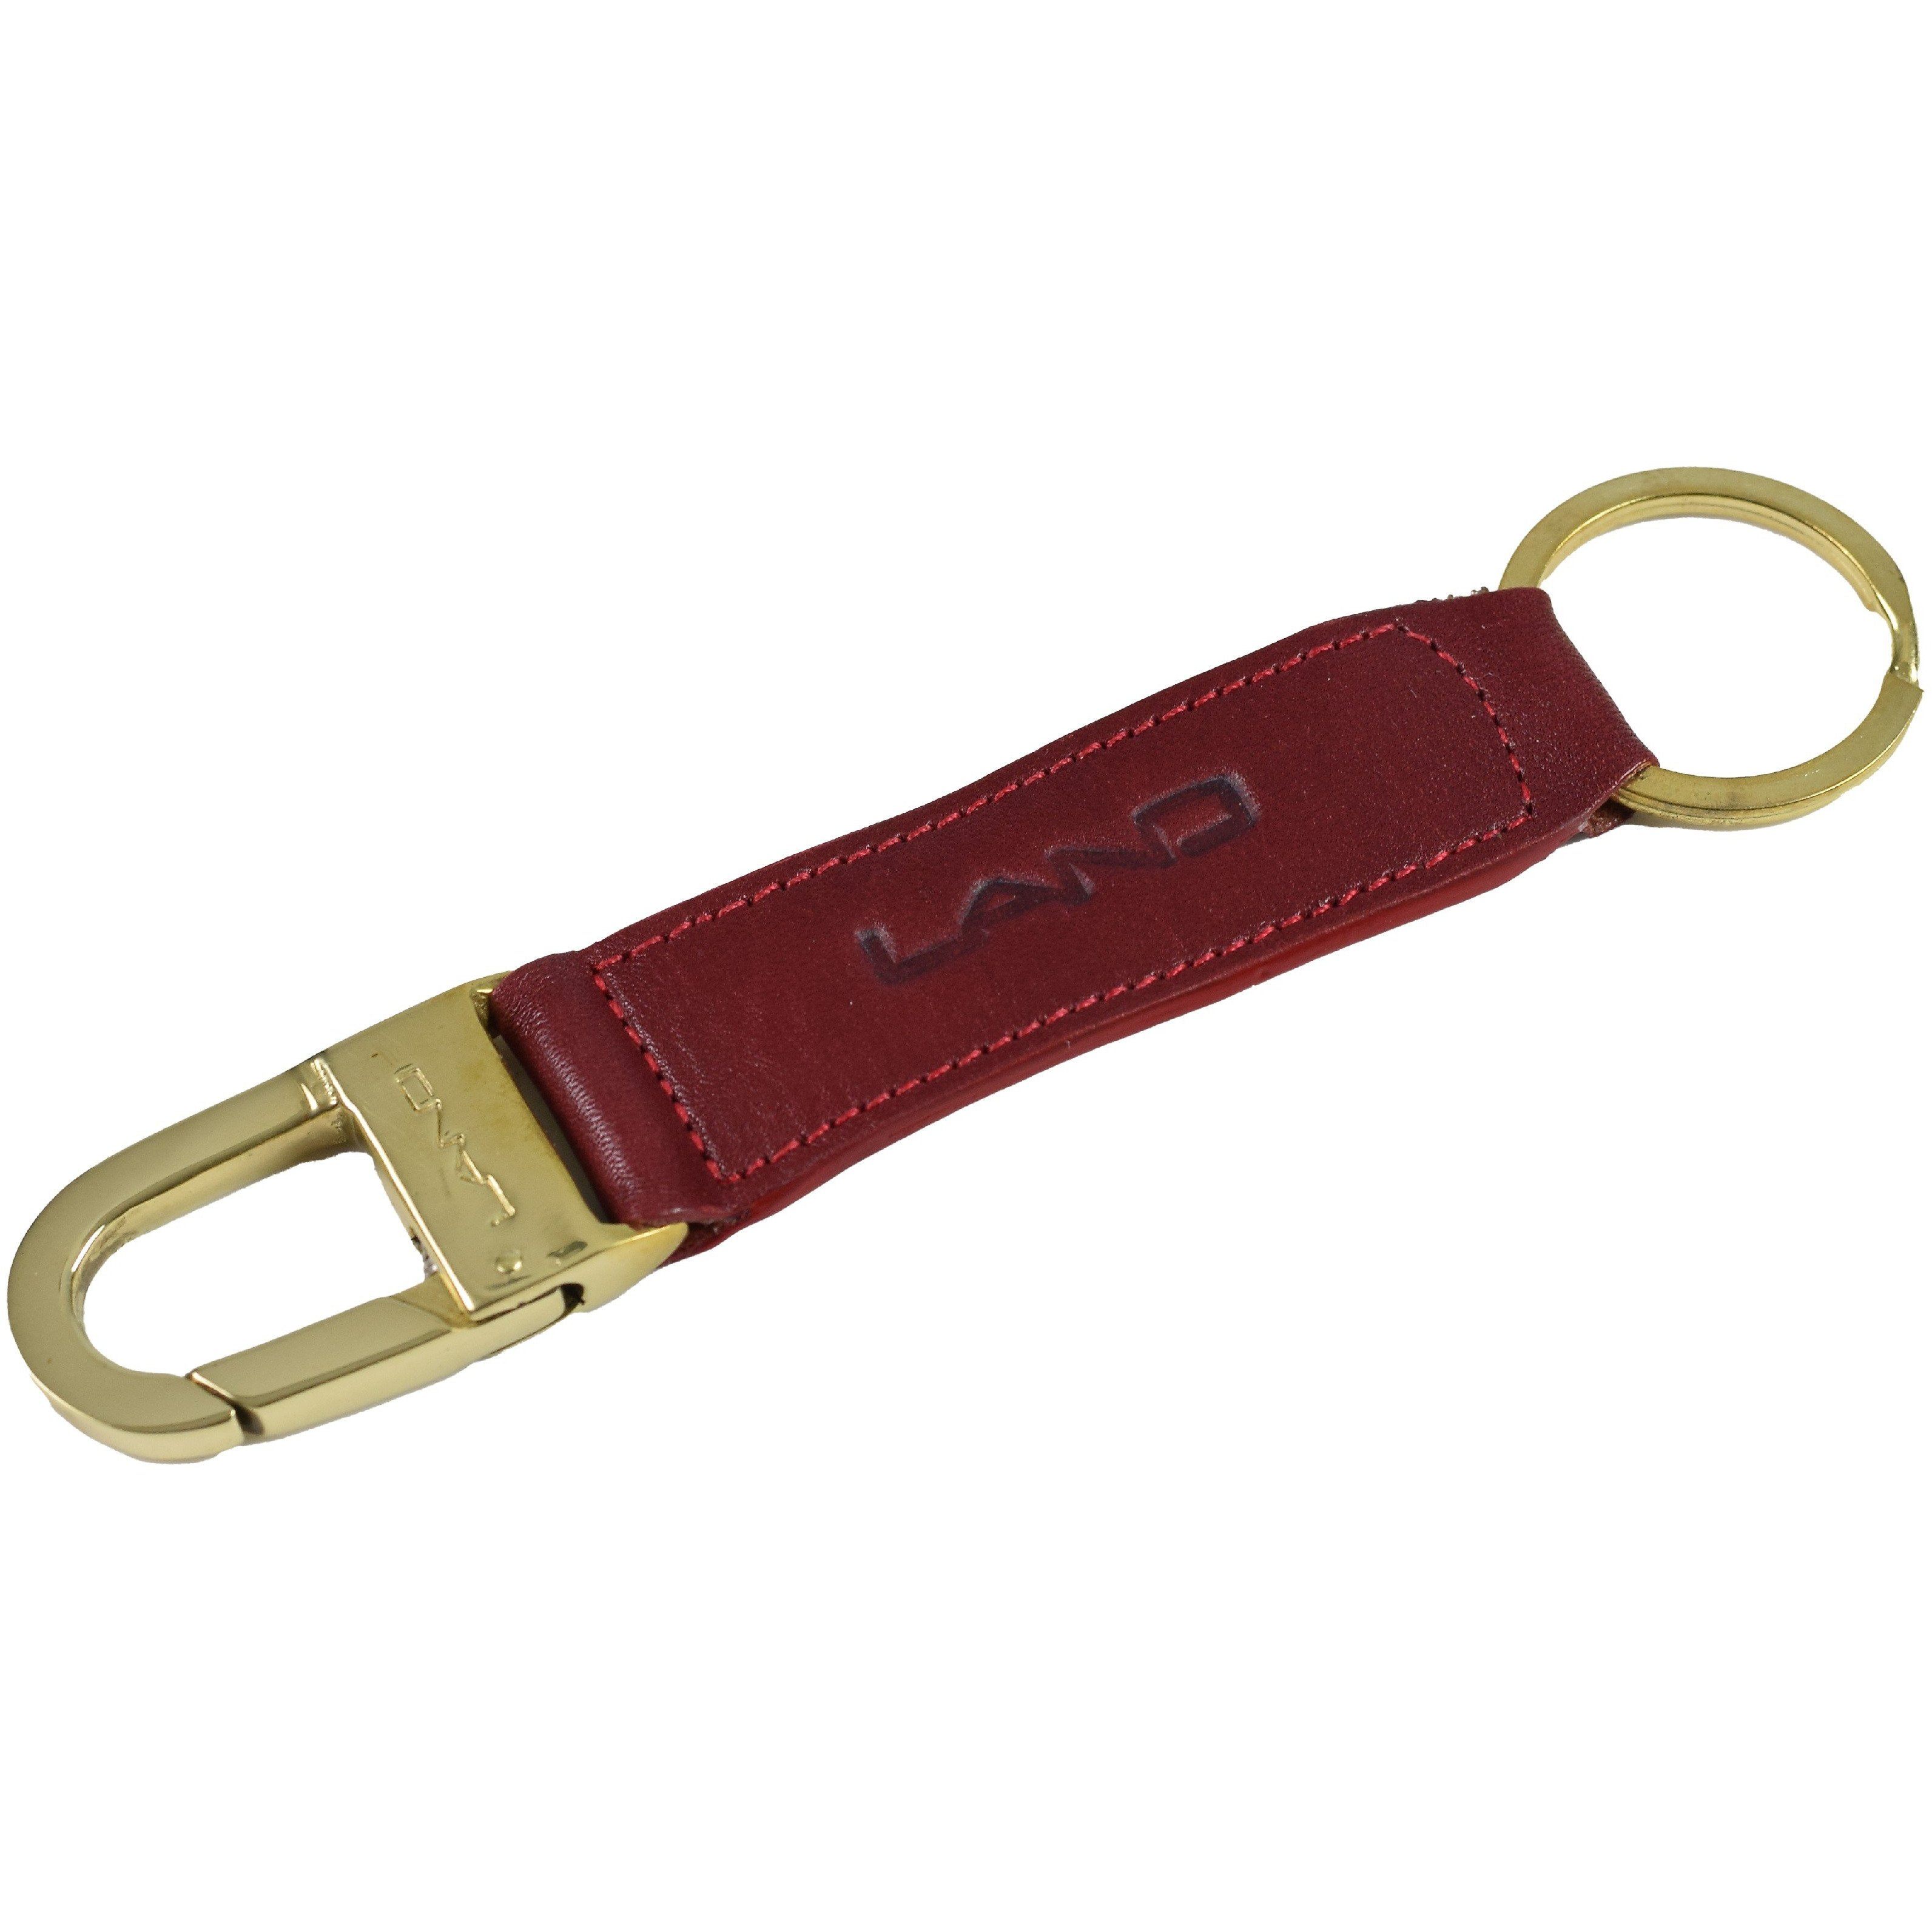 Limited Key Ring - LAND Leather Goods